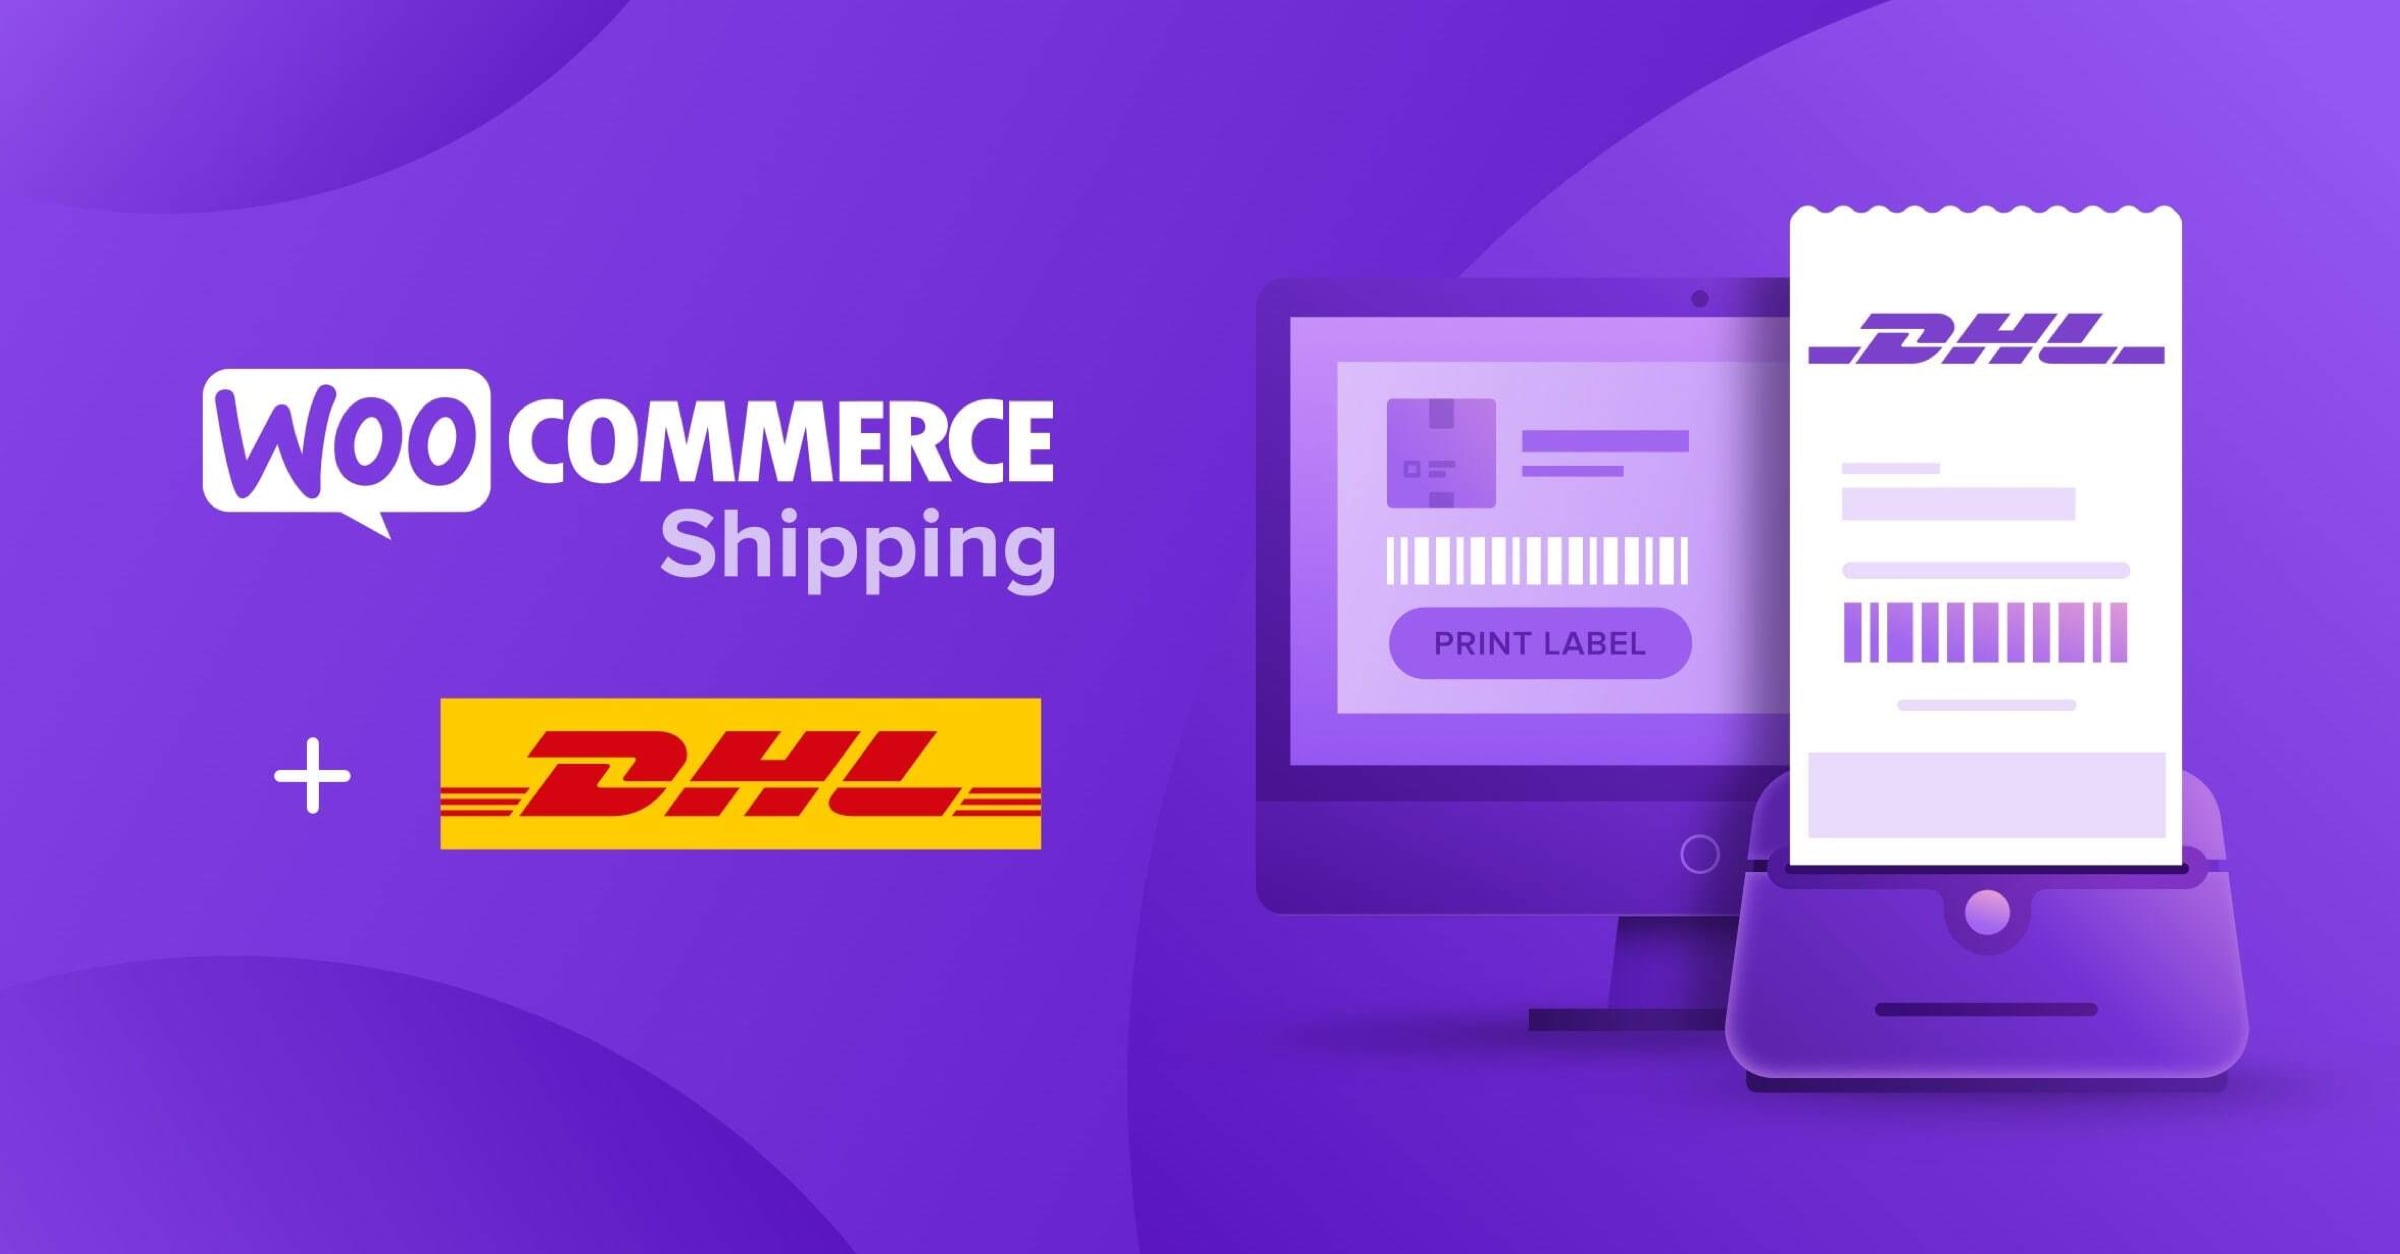 woocommerce and dhl logos on a purple background